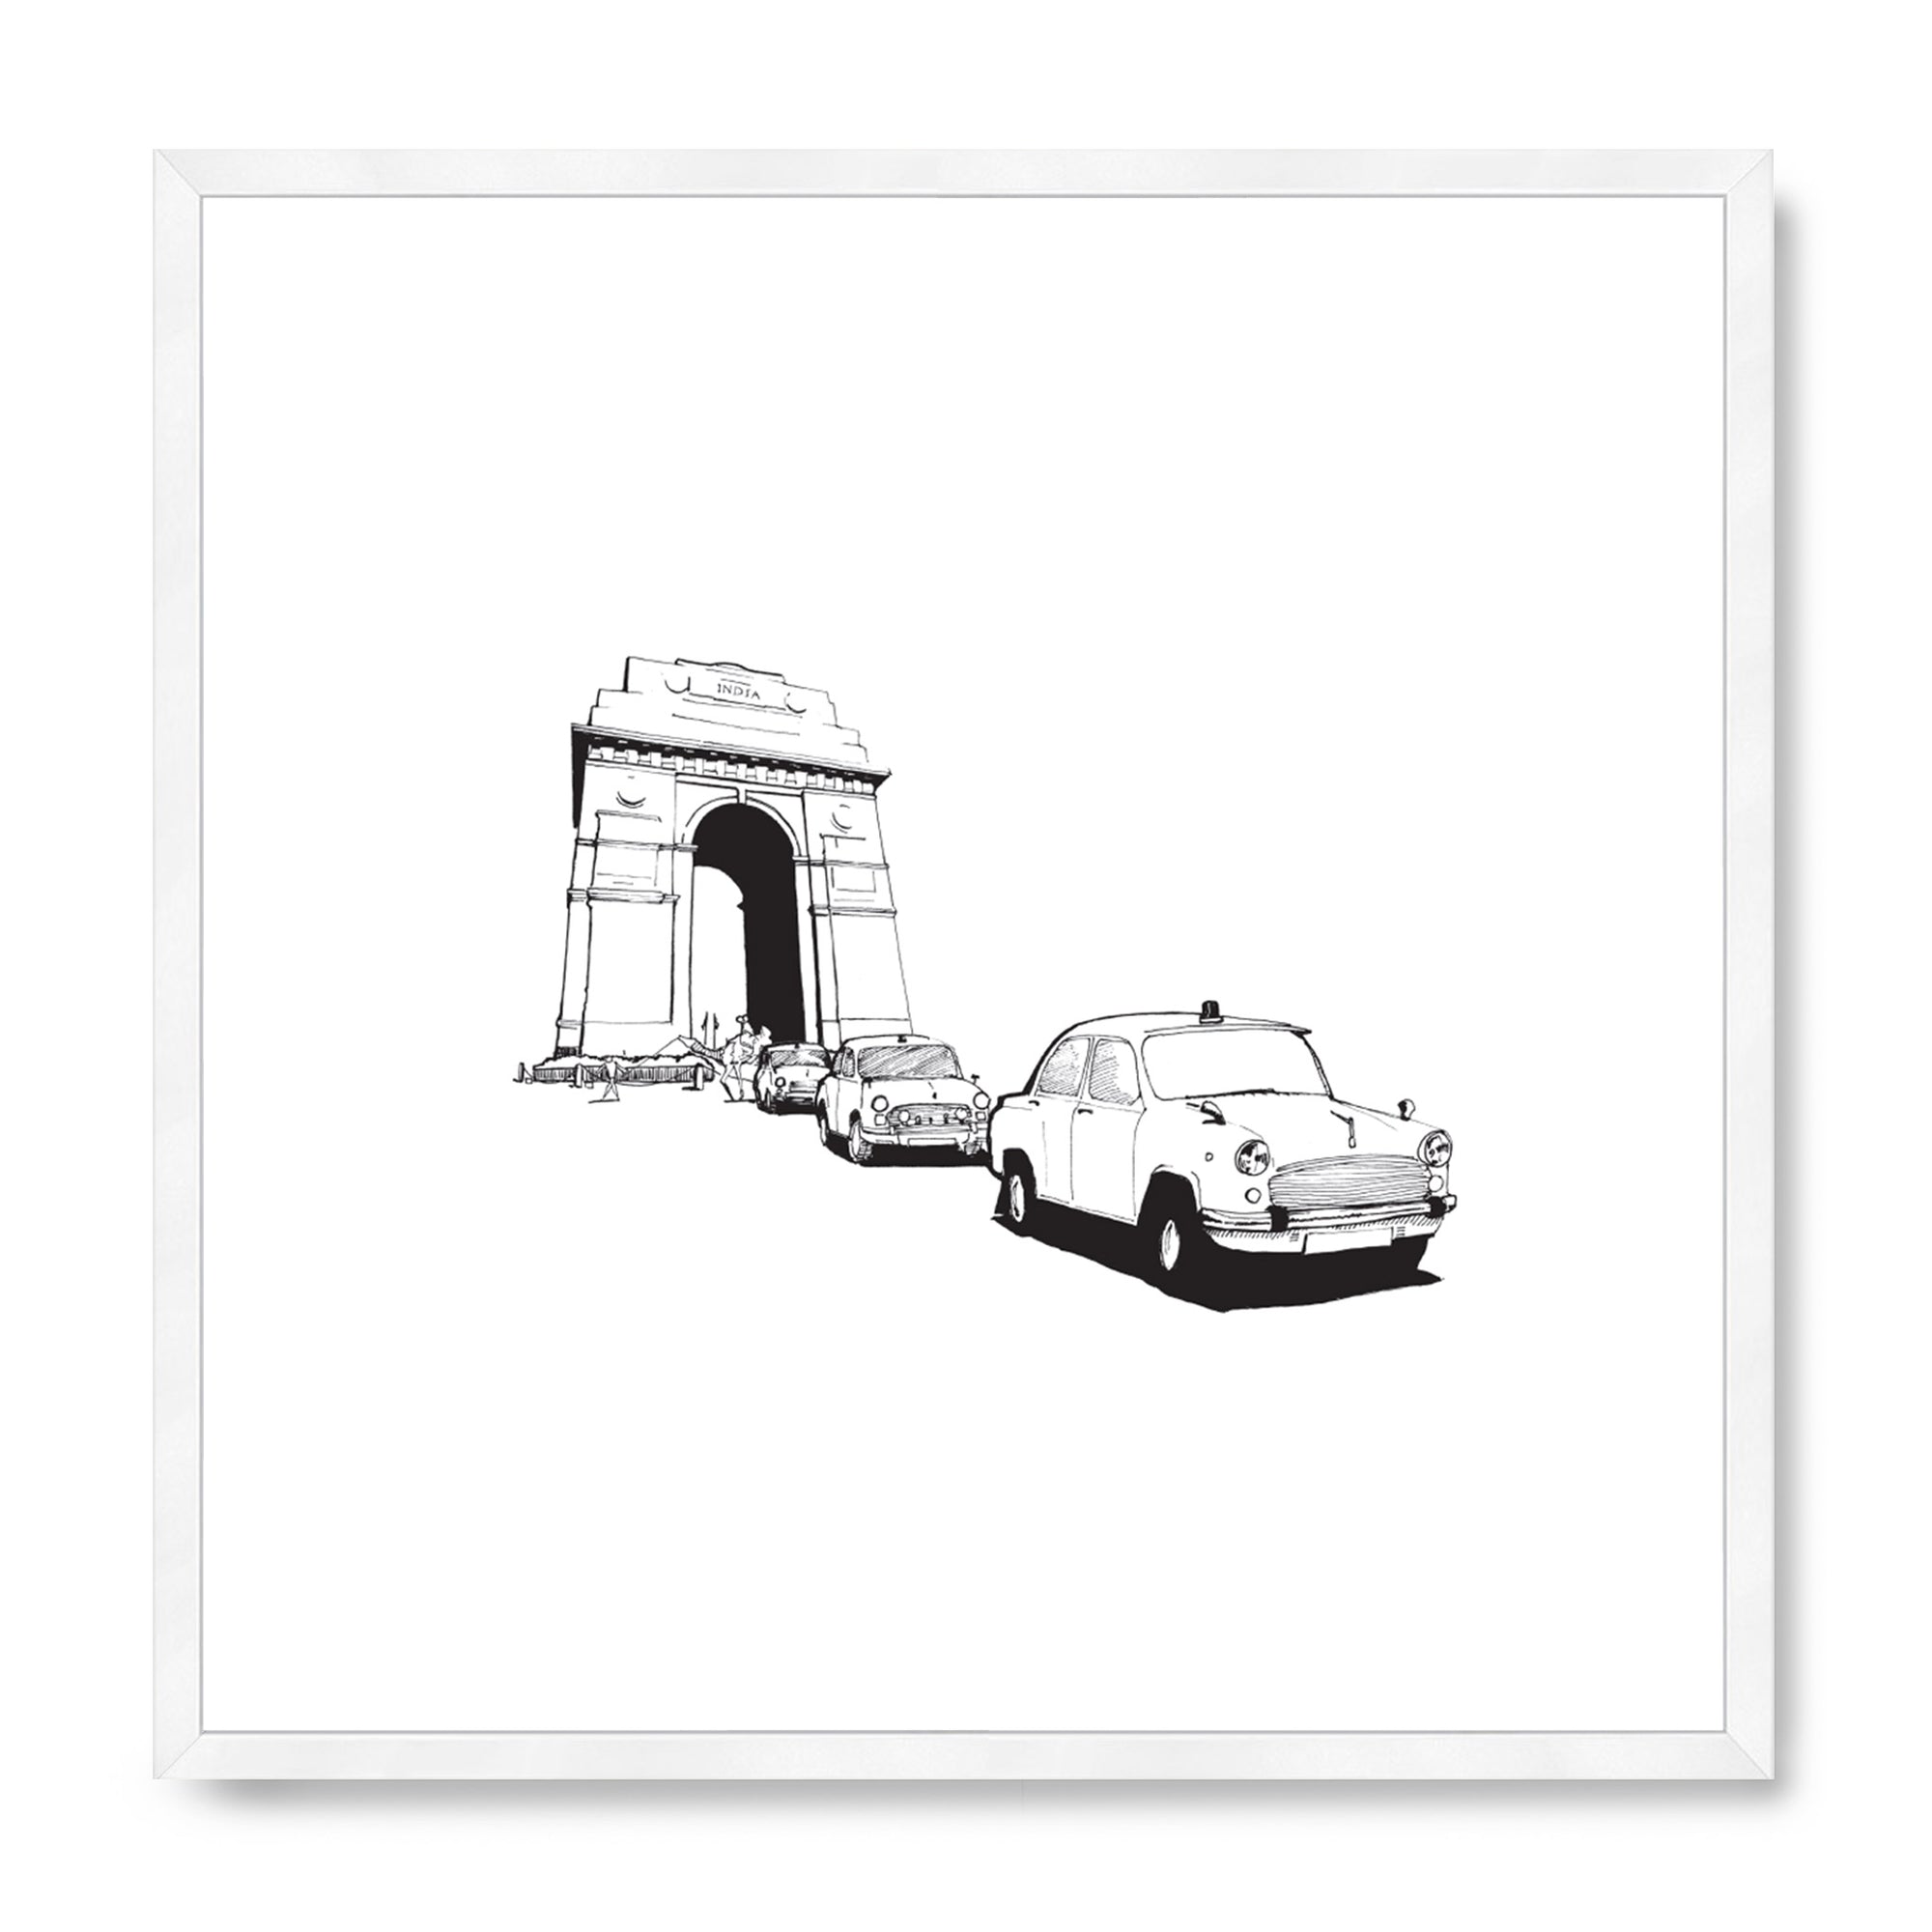 India Gate Paintings for Sale - Fine Art America